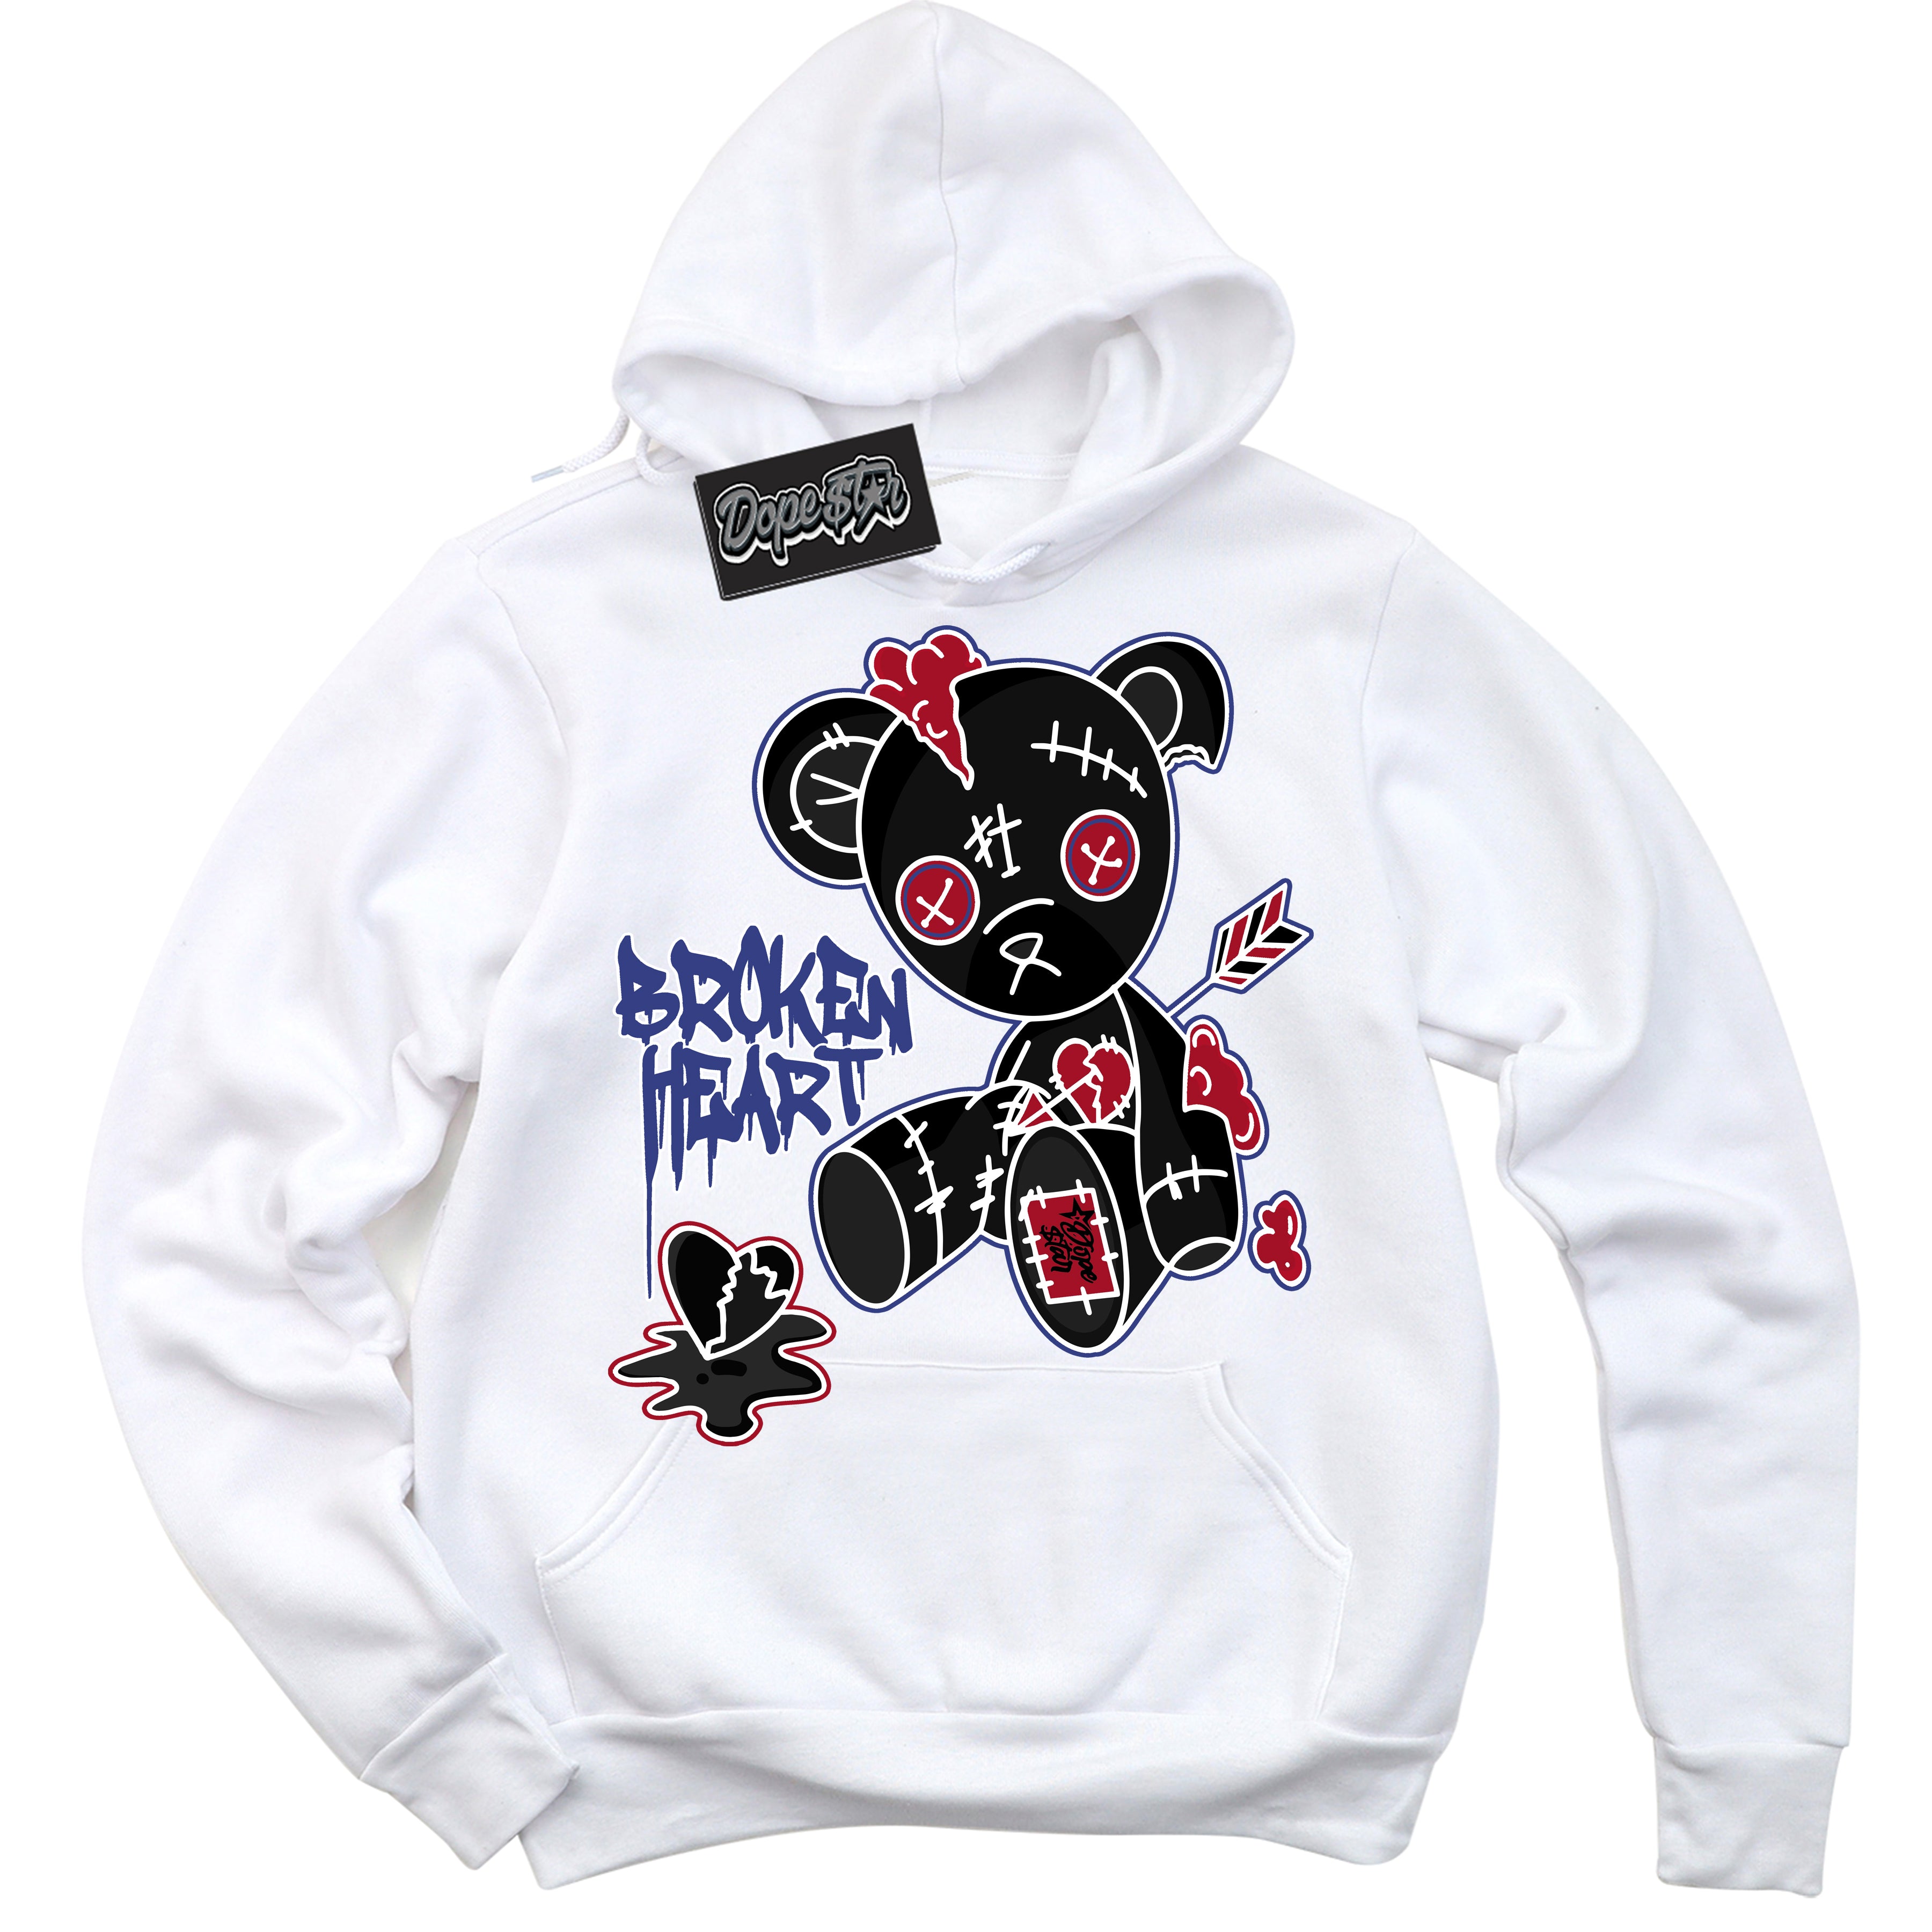 Cool White Hoodie with “ Broken Heart Bear ”  design that Perfectly Matches Playoffs 8s Sneakers.